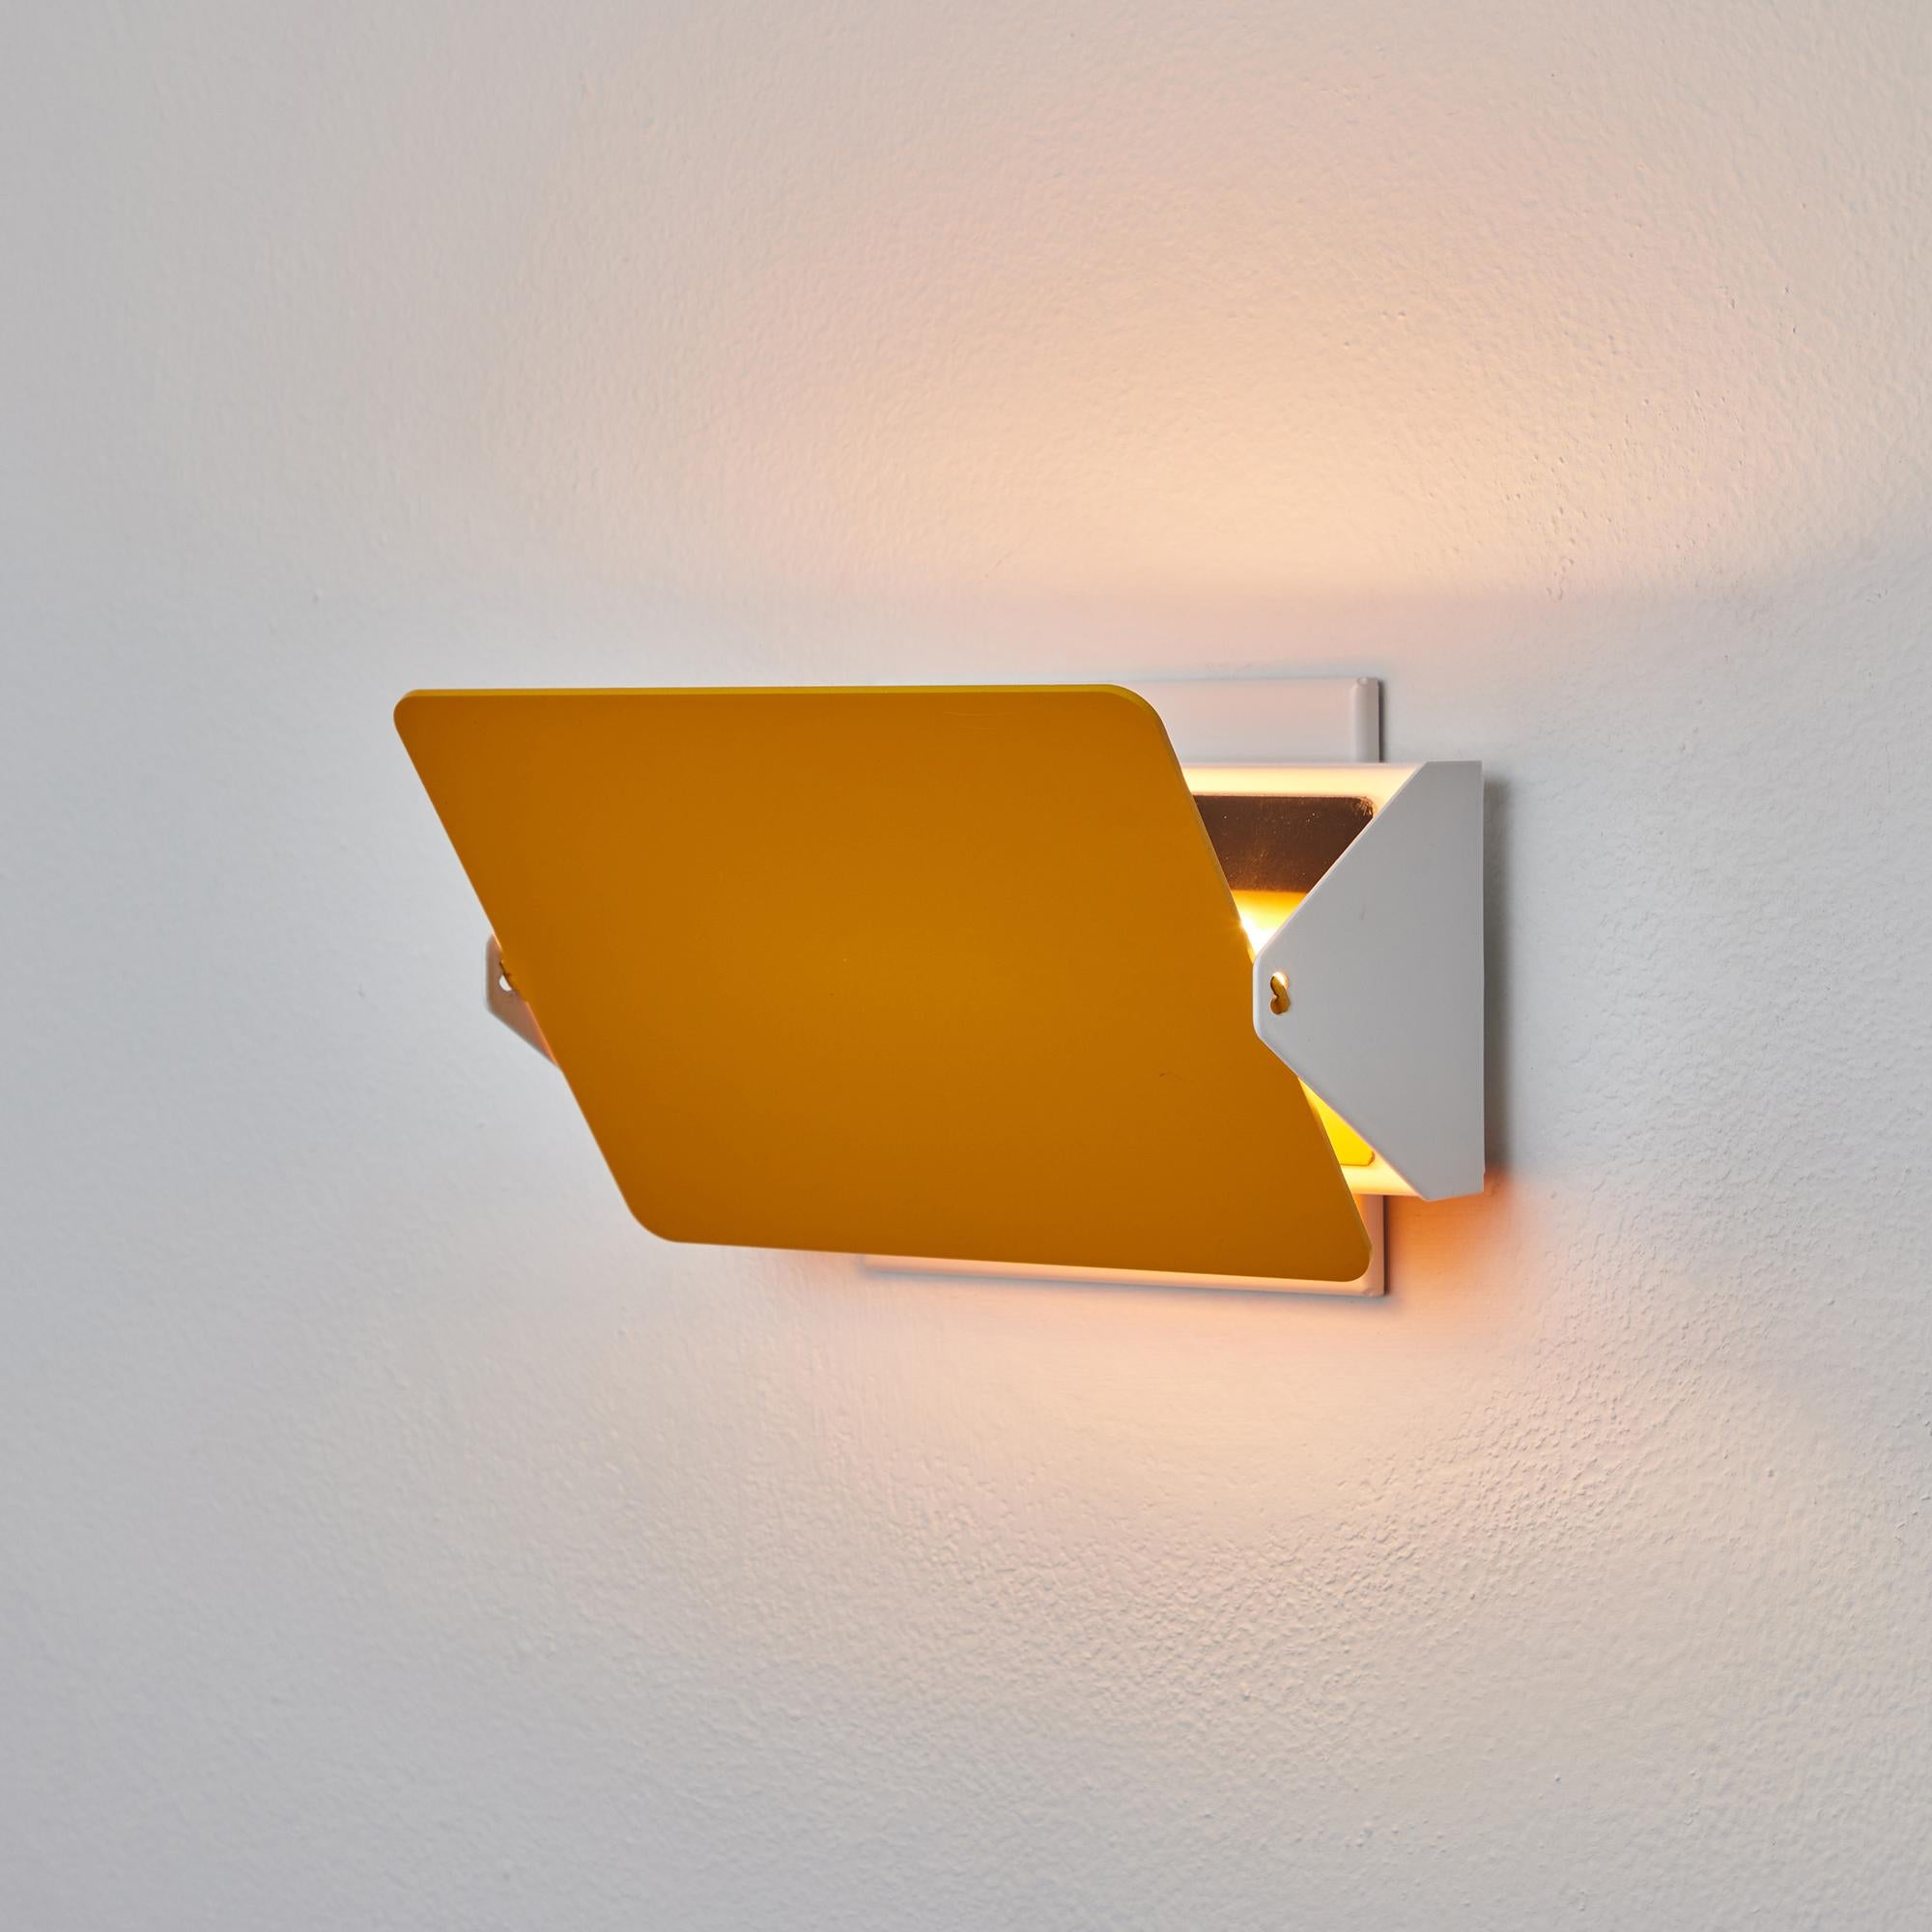 French Charlotte Perriand 'Applique à Volet Pivotant' Wall Light in Yellow for Nemo